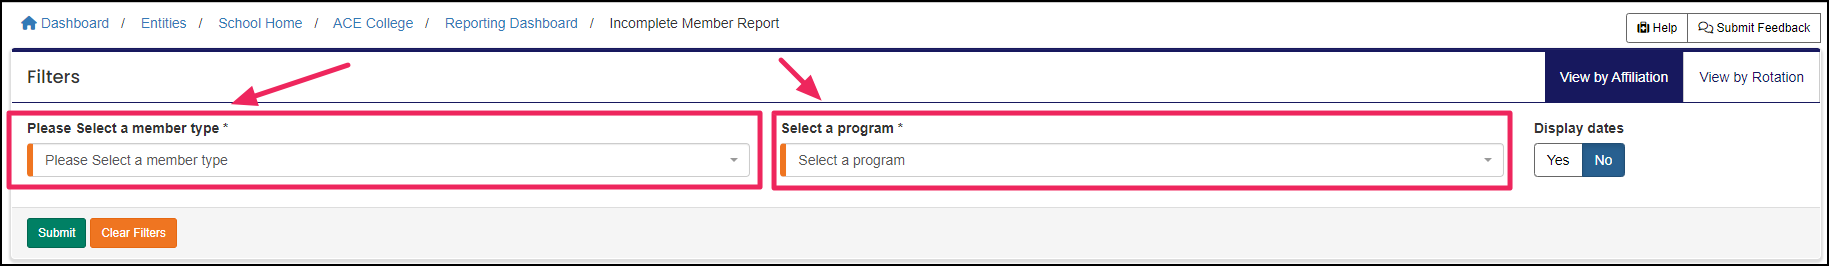 Image shows fields to select a member type and program for the incomplete member report.